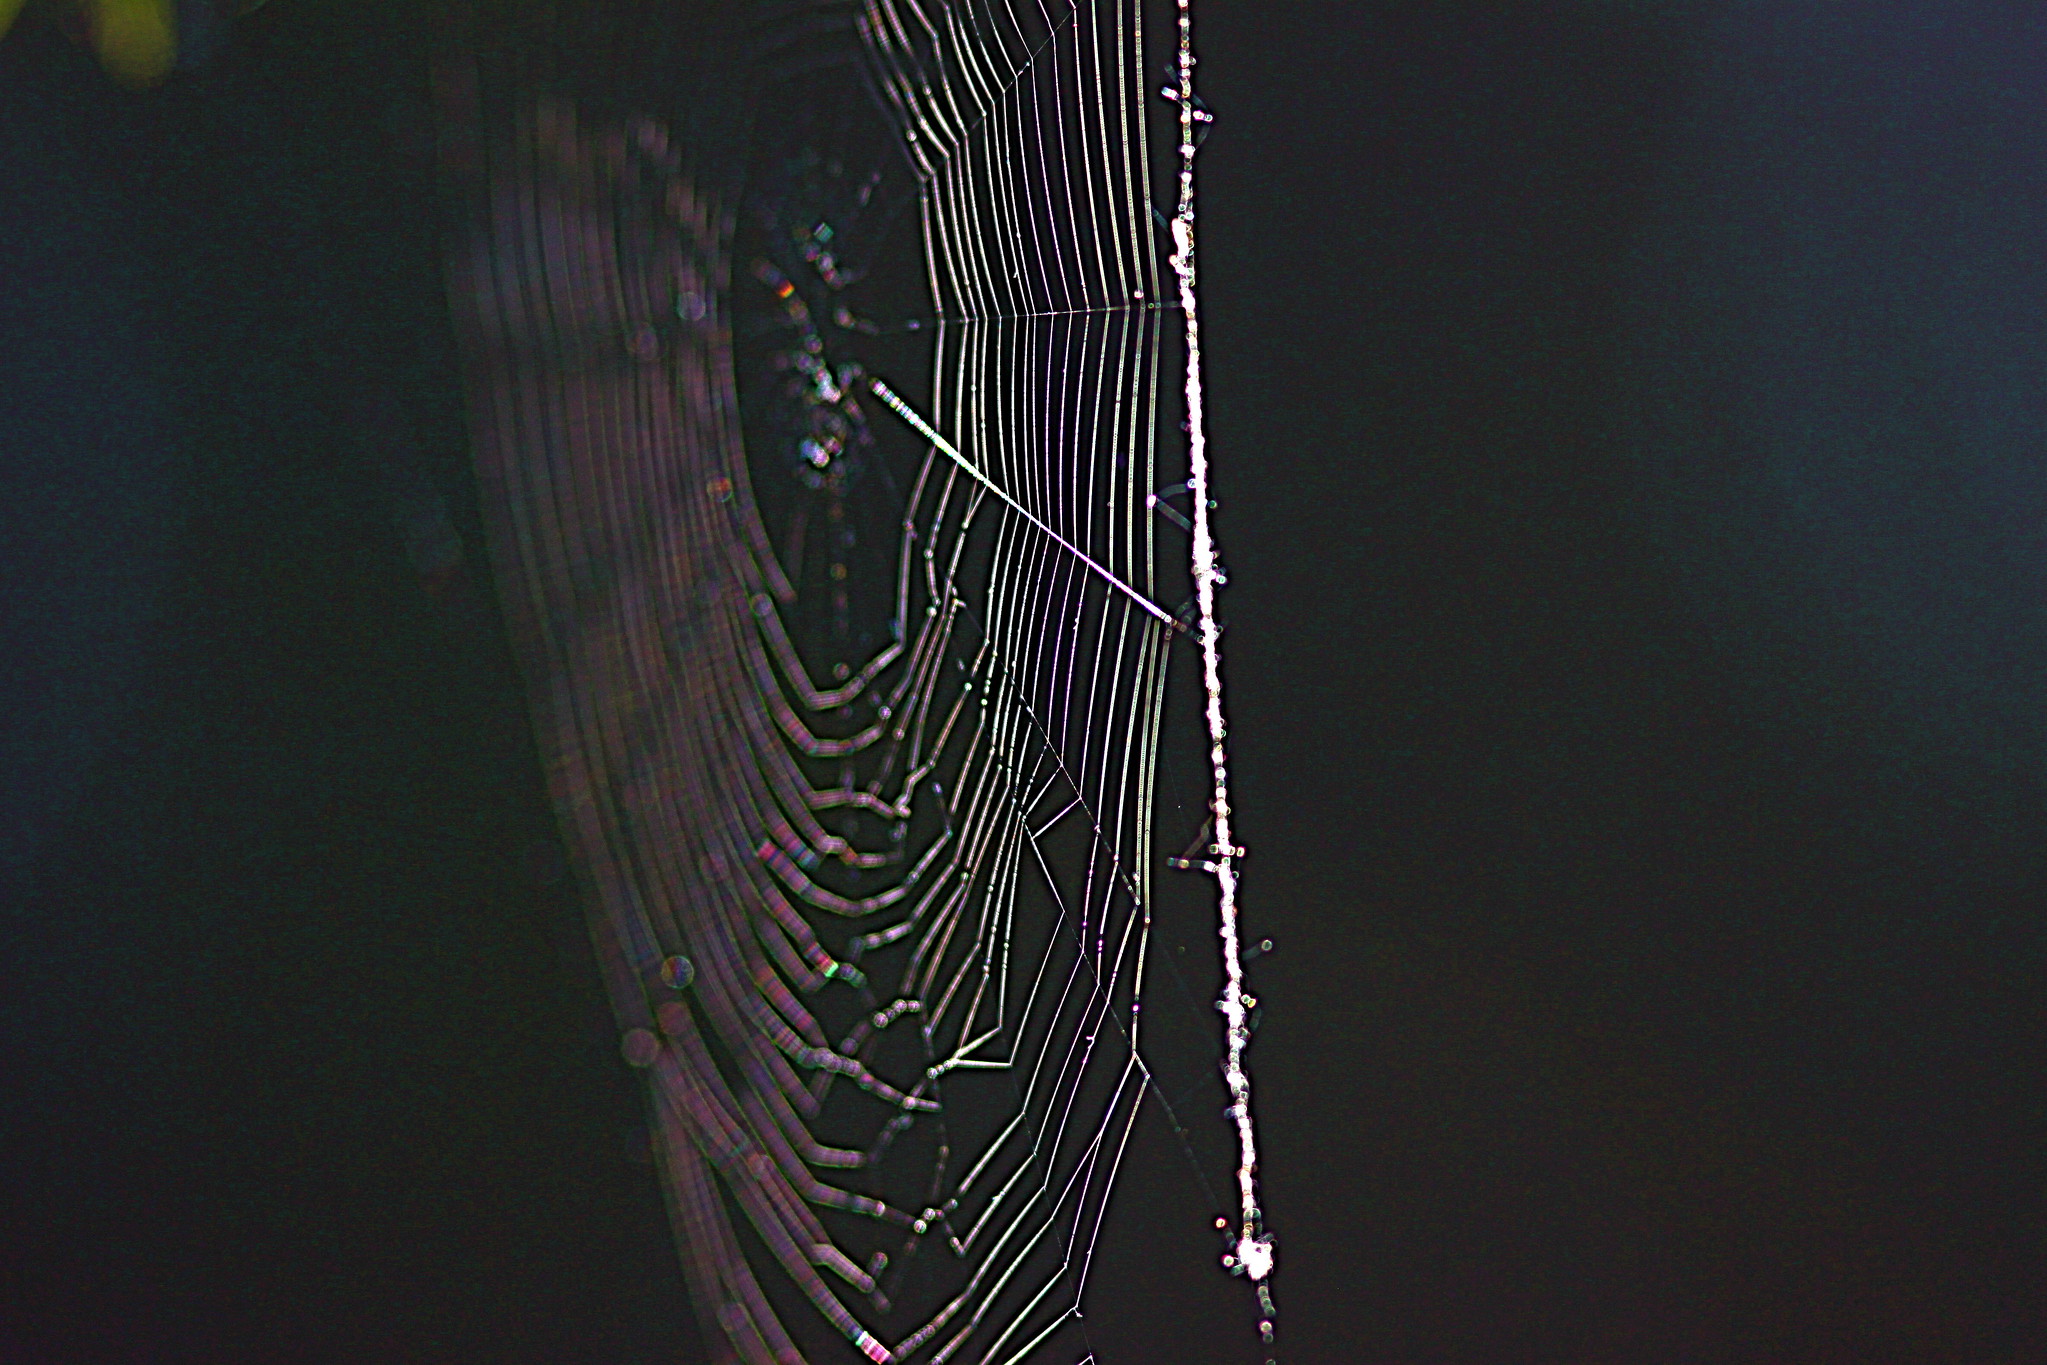 Can a spider web every get too big for its creator?